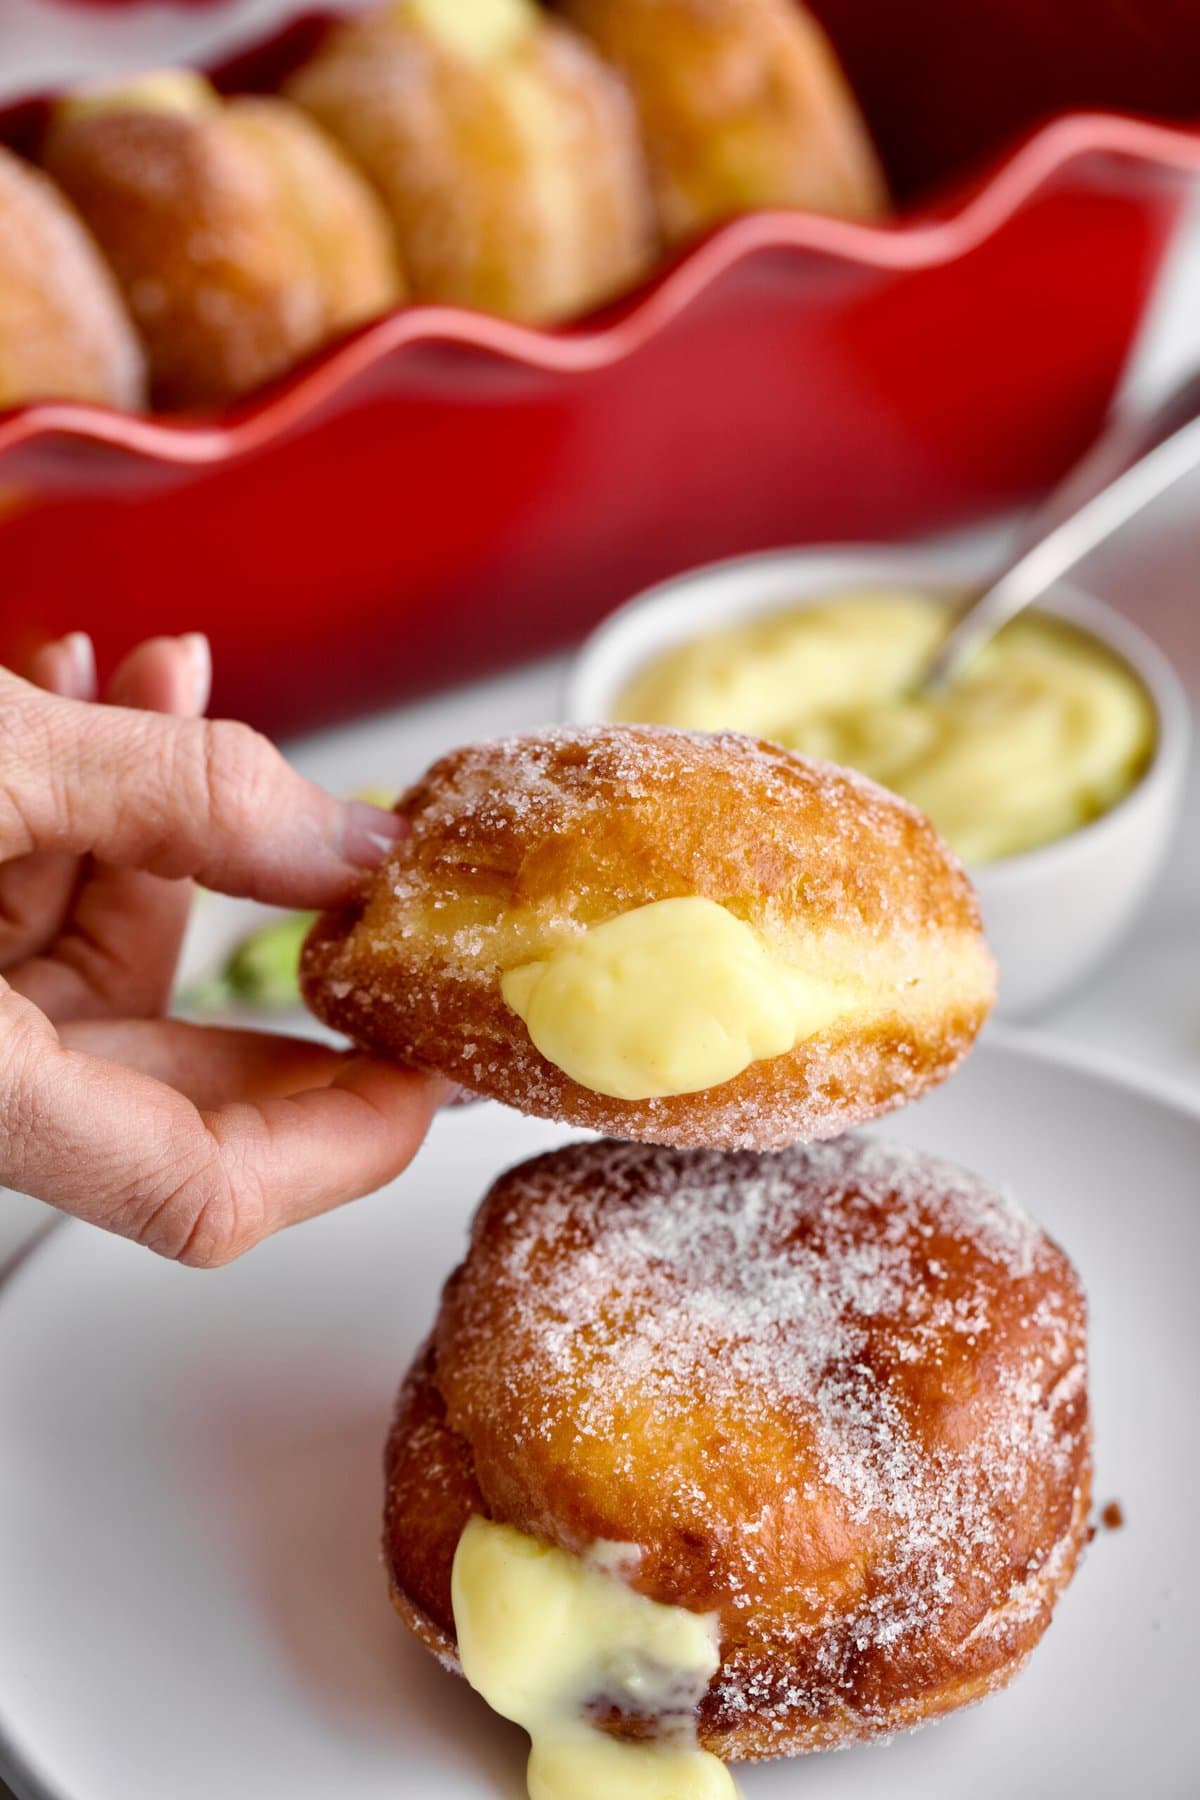 hands holding a bomboloni donut with cream in the middle.